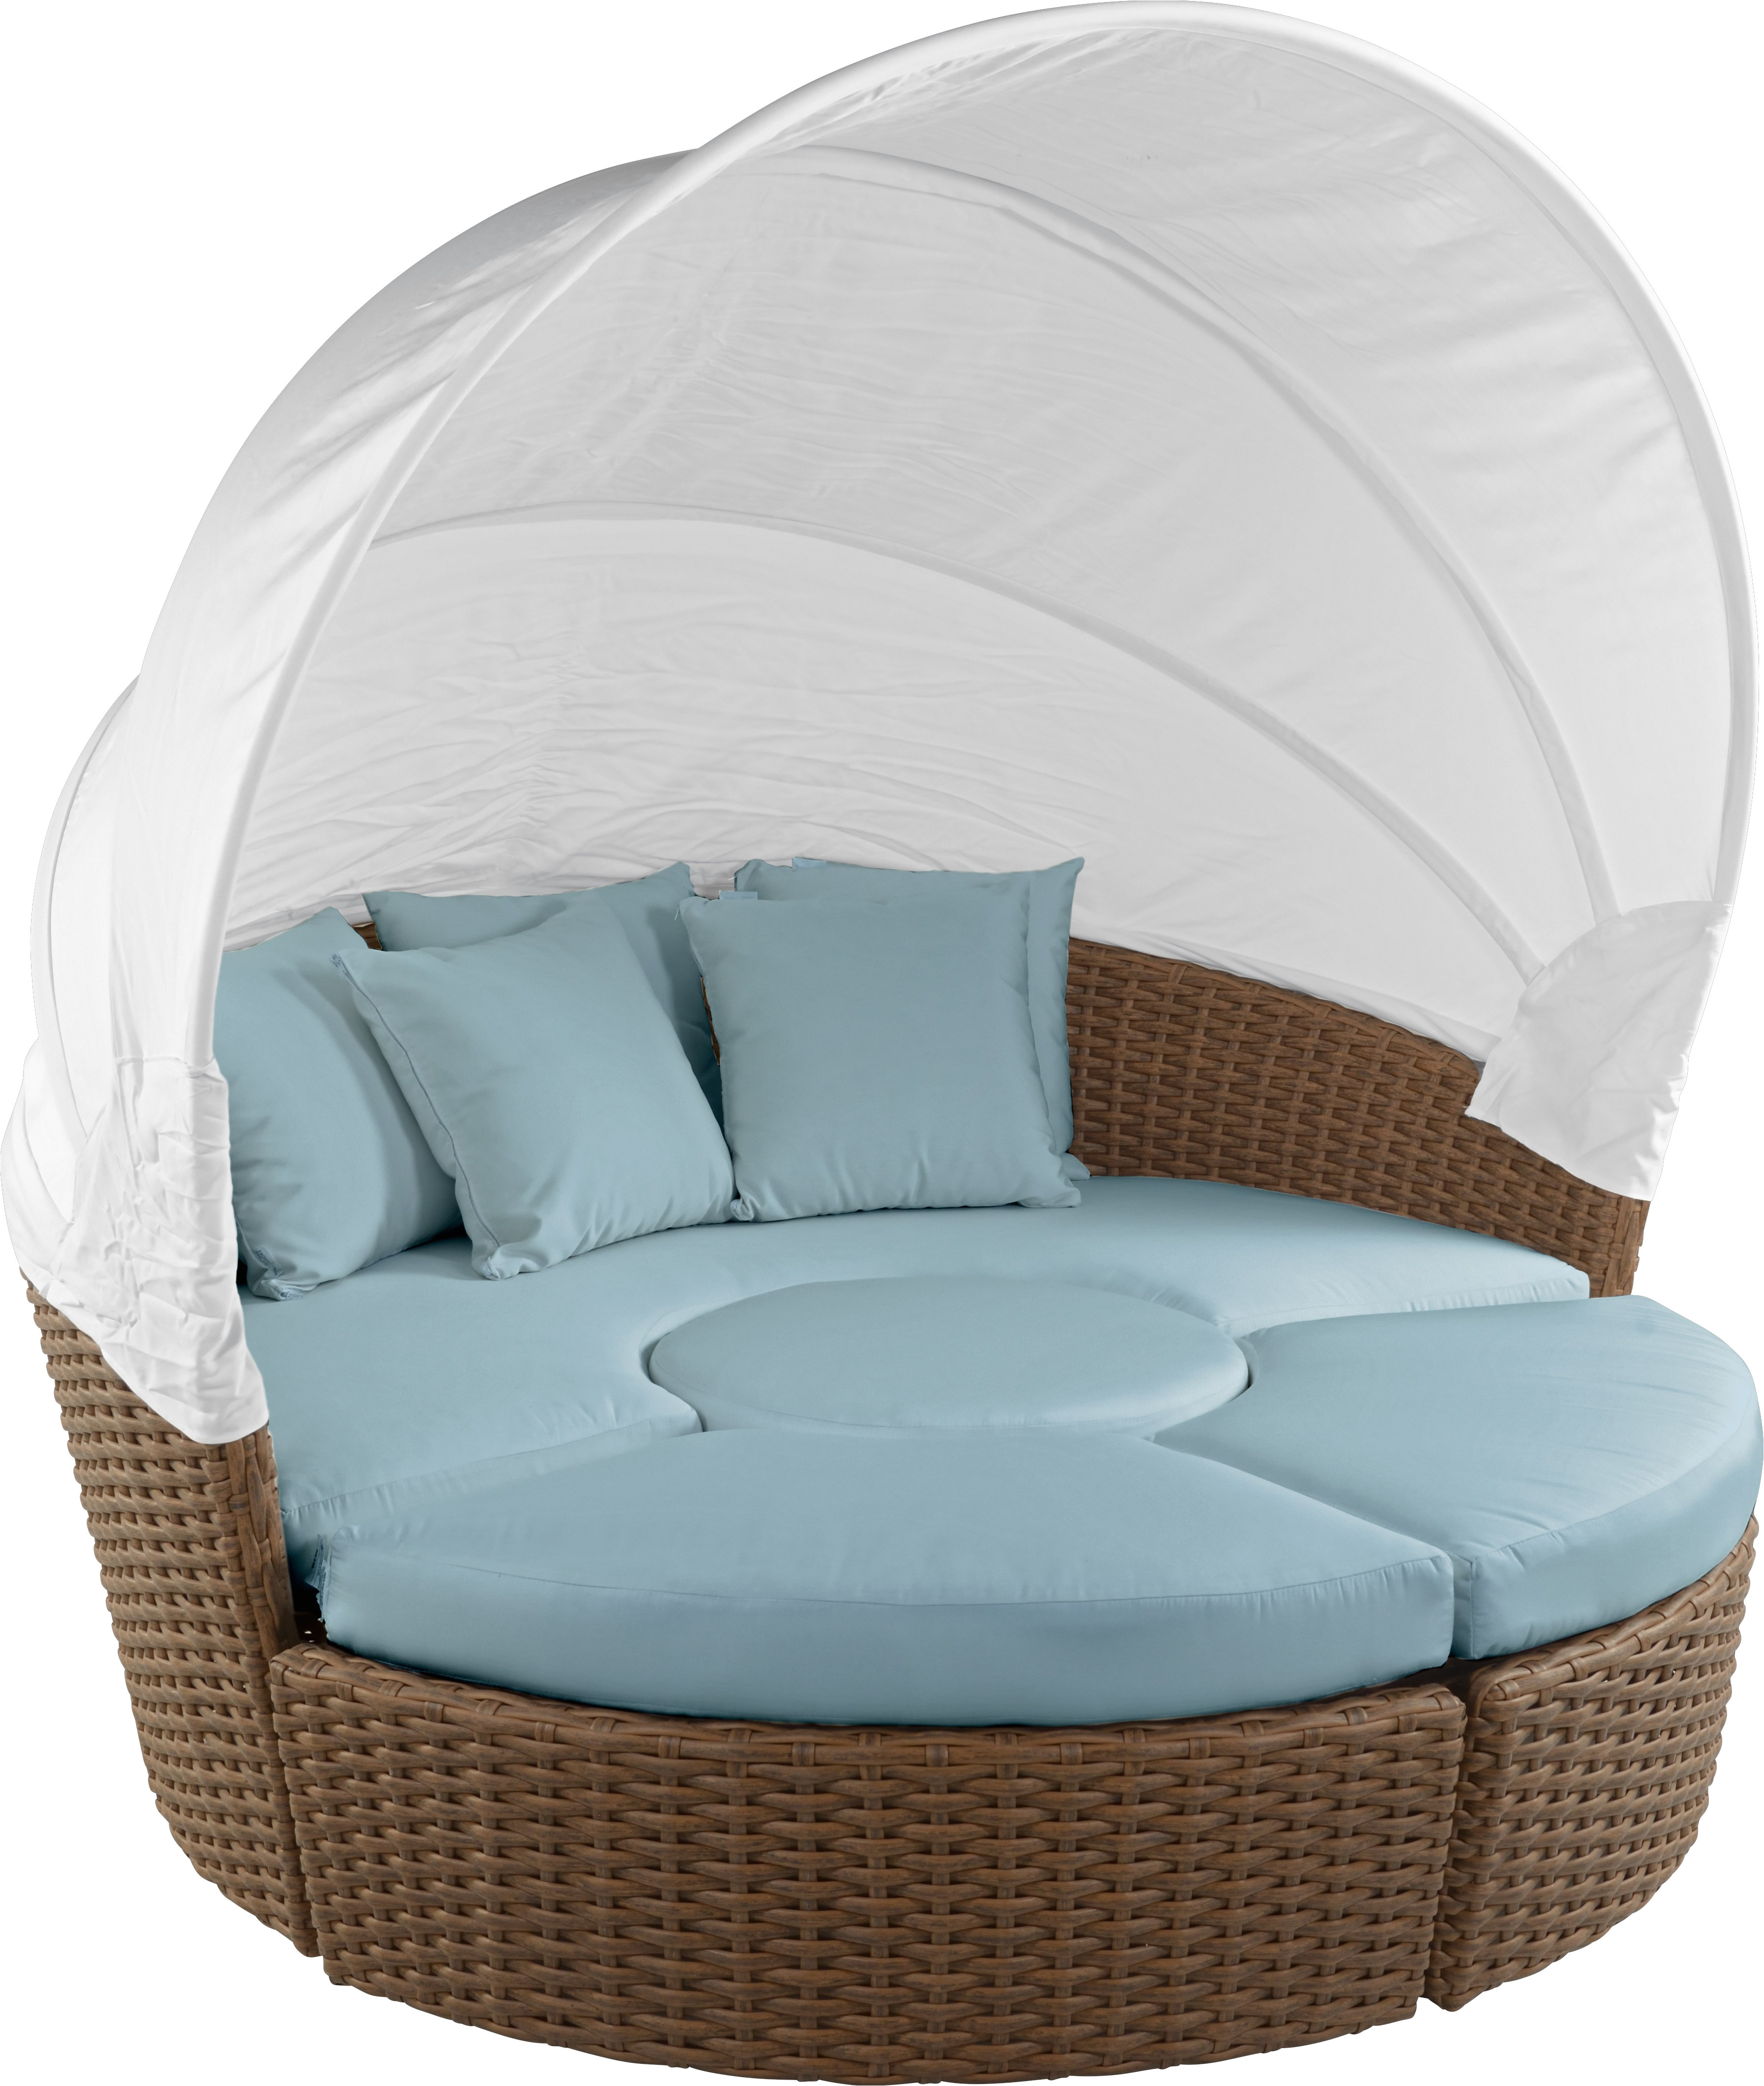 palisades brown daybed with blue cushions outdoor daybeds blue wicker